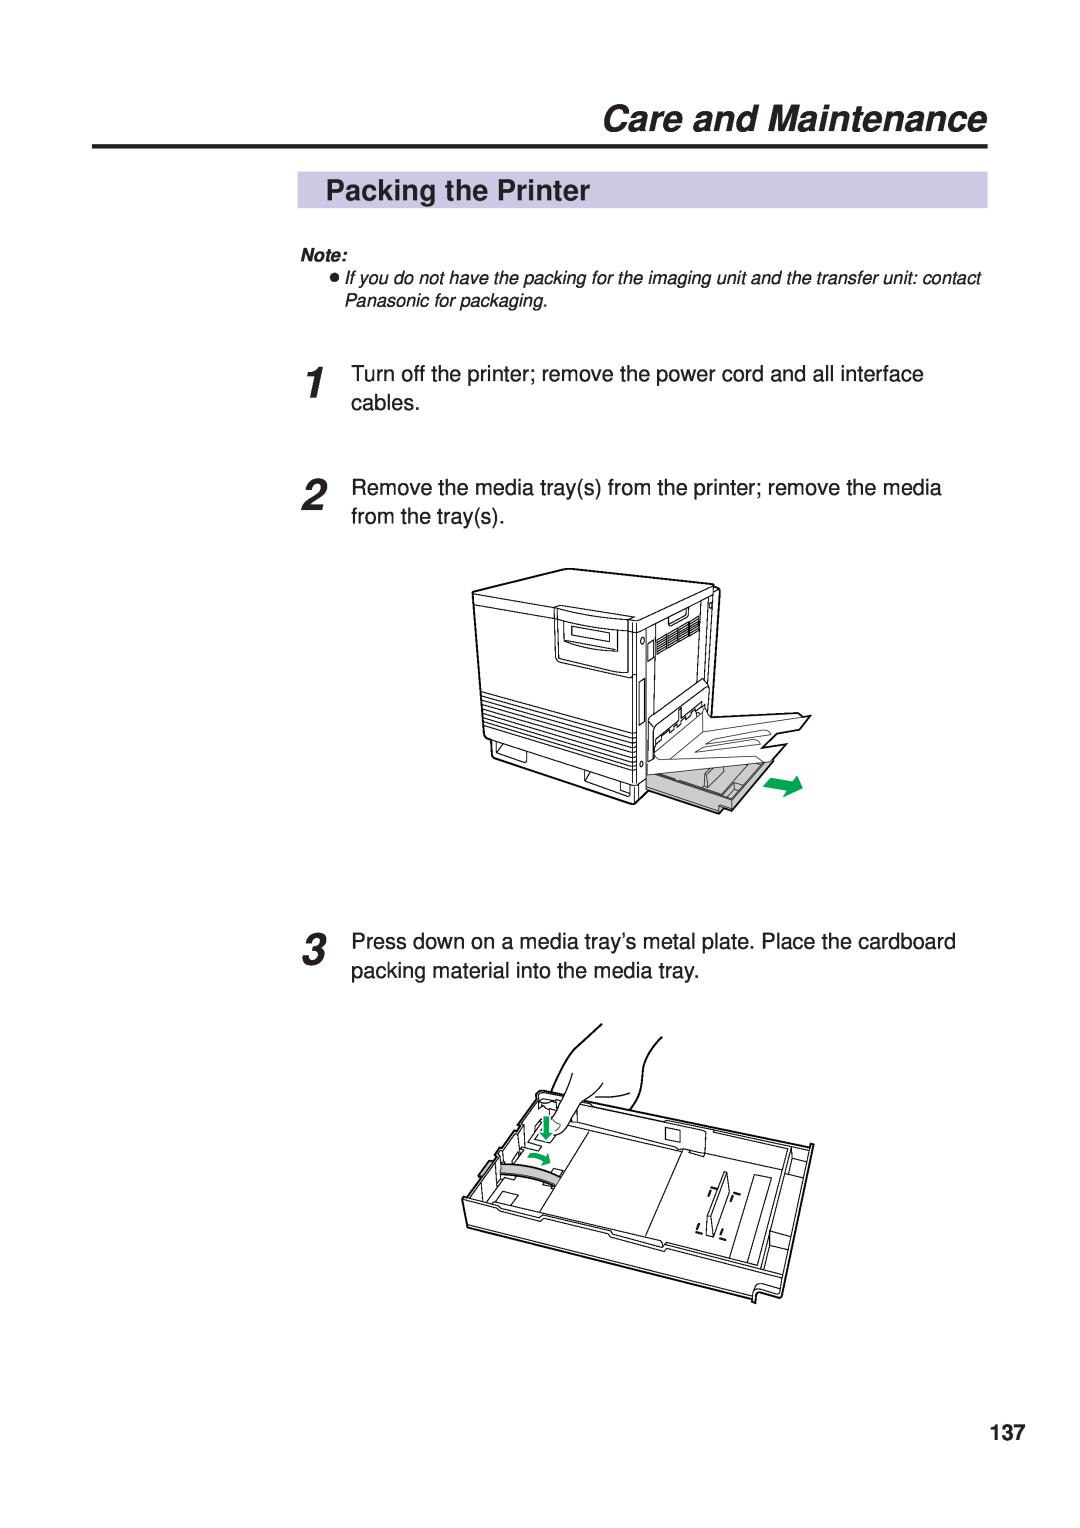 Panasonic KX-PS8000 Packing the Printer, Turn off the printer remove the power cord and all interface, from the trays 